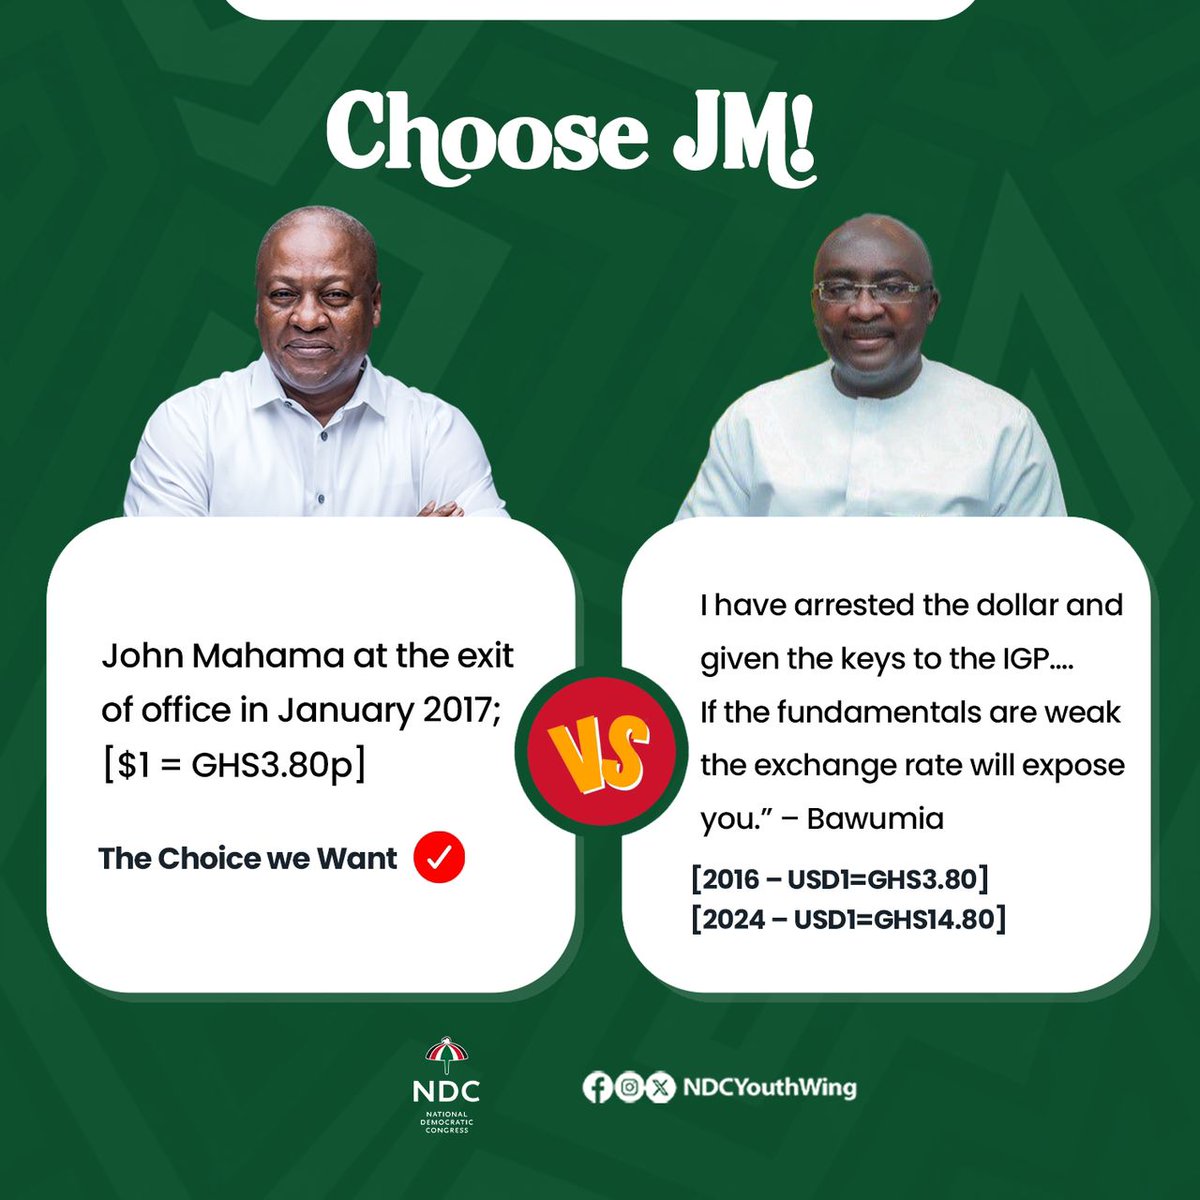 In opposition @MBawumia made the most noise about depreciation. In govt he's been floored for his  ignorance on exchange rate mgt.
The difference is as day and night. Choose wisely, choose @JDMahama on Dec 7.
#ChangeIsComing